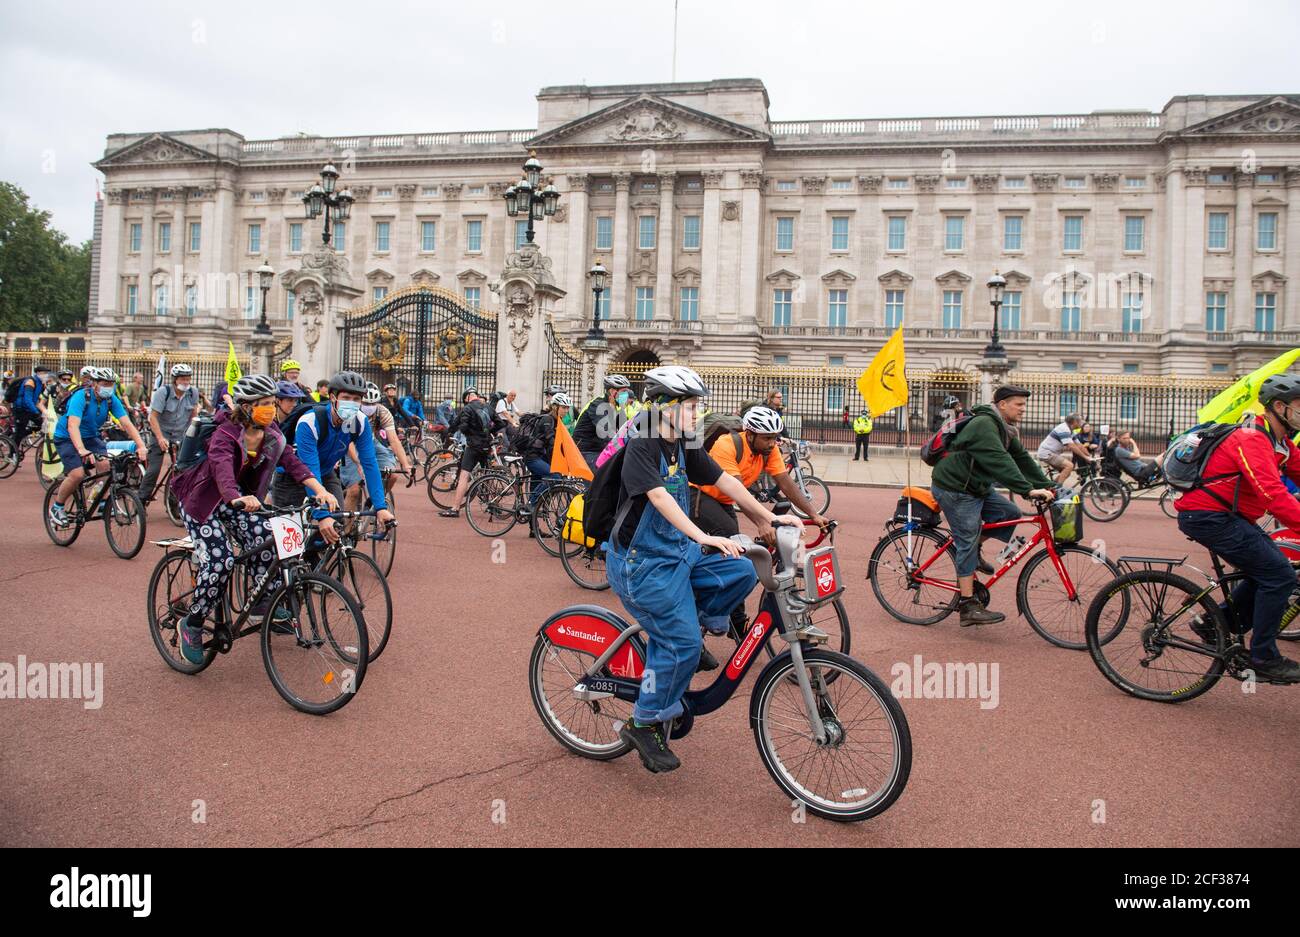 Cyclists set off from outside Buckingham Palace during an Extinction Rebellion protest in London. The environmental campaign group has planned events to be held at several landmarks in the capital. Stock Photo